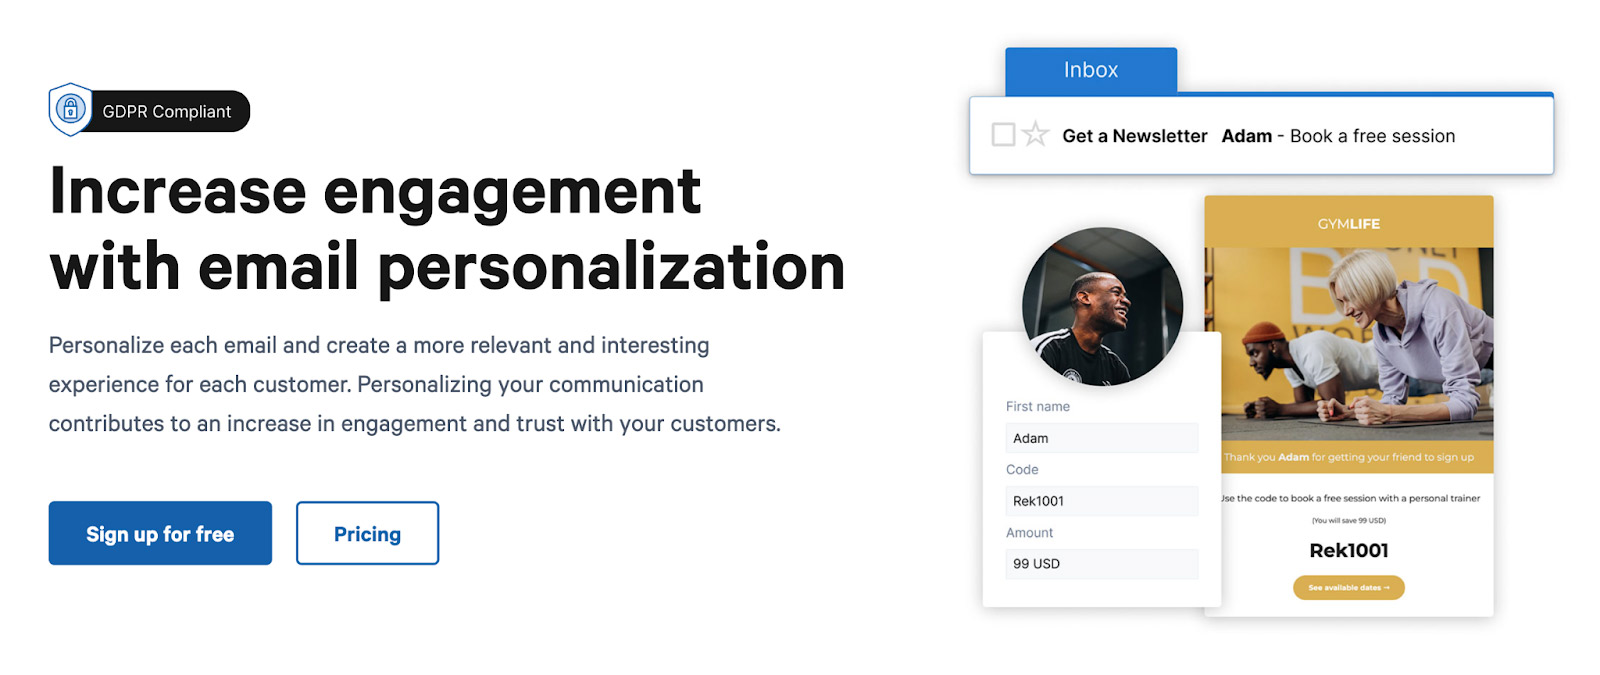 Increase engagement with email personalization